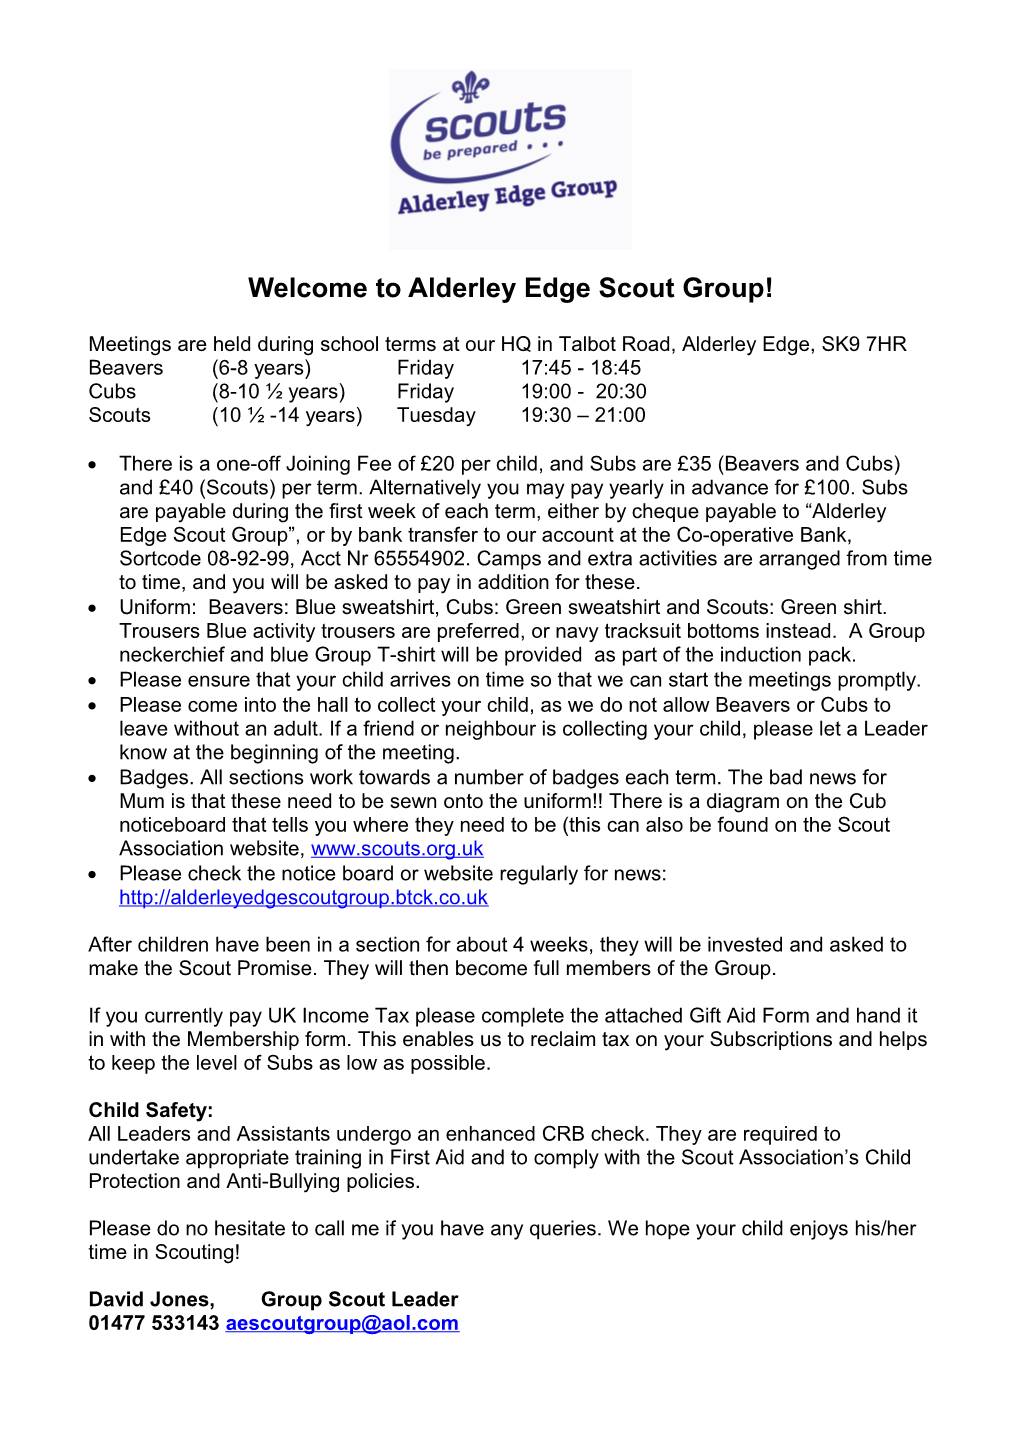 Welcome to Alderley Edge Scout Group!